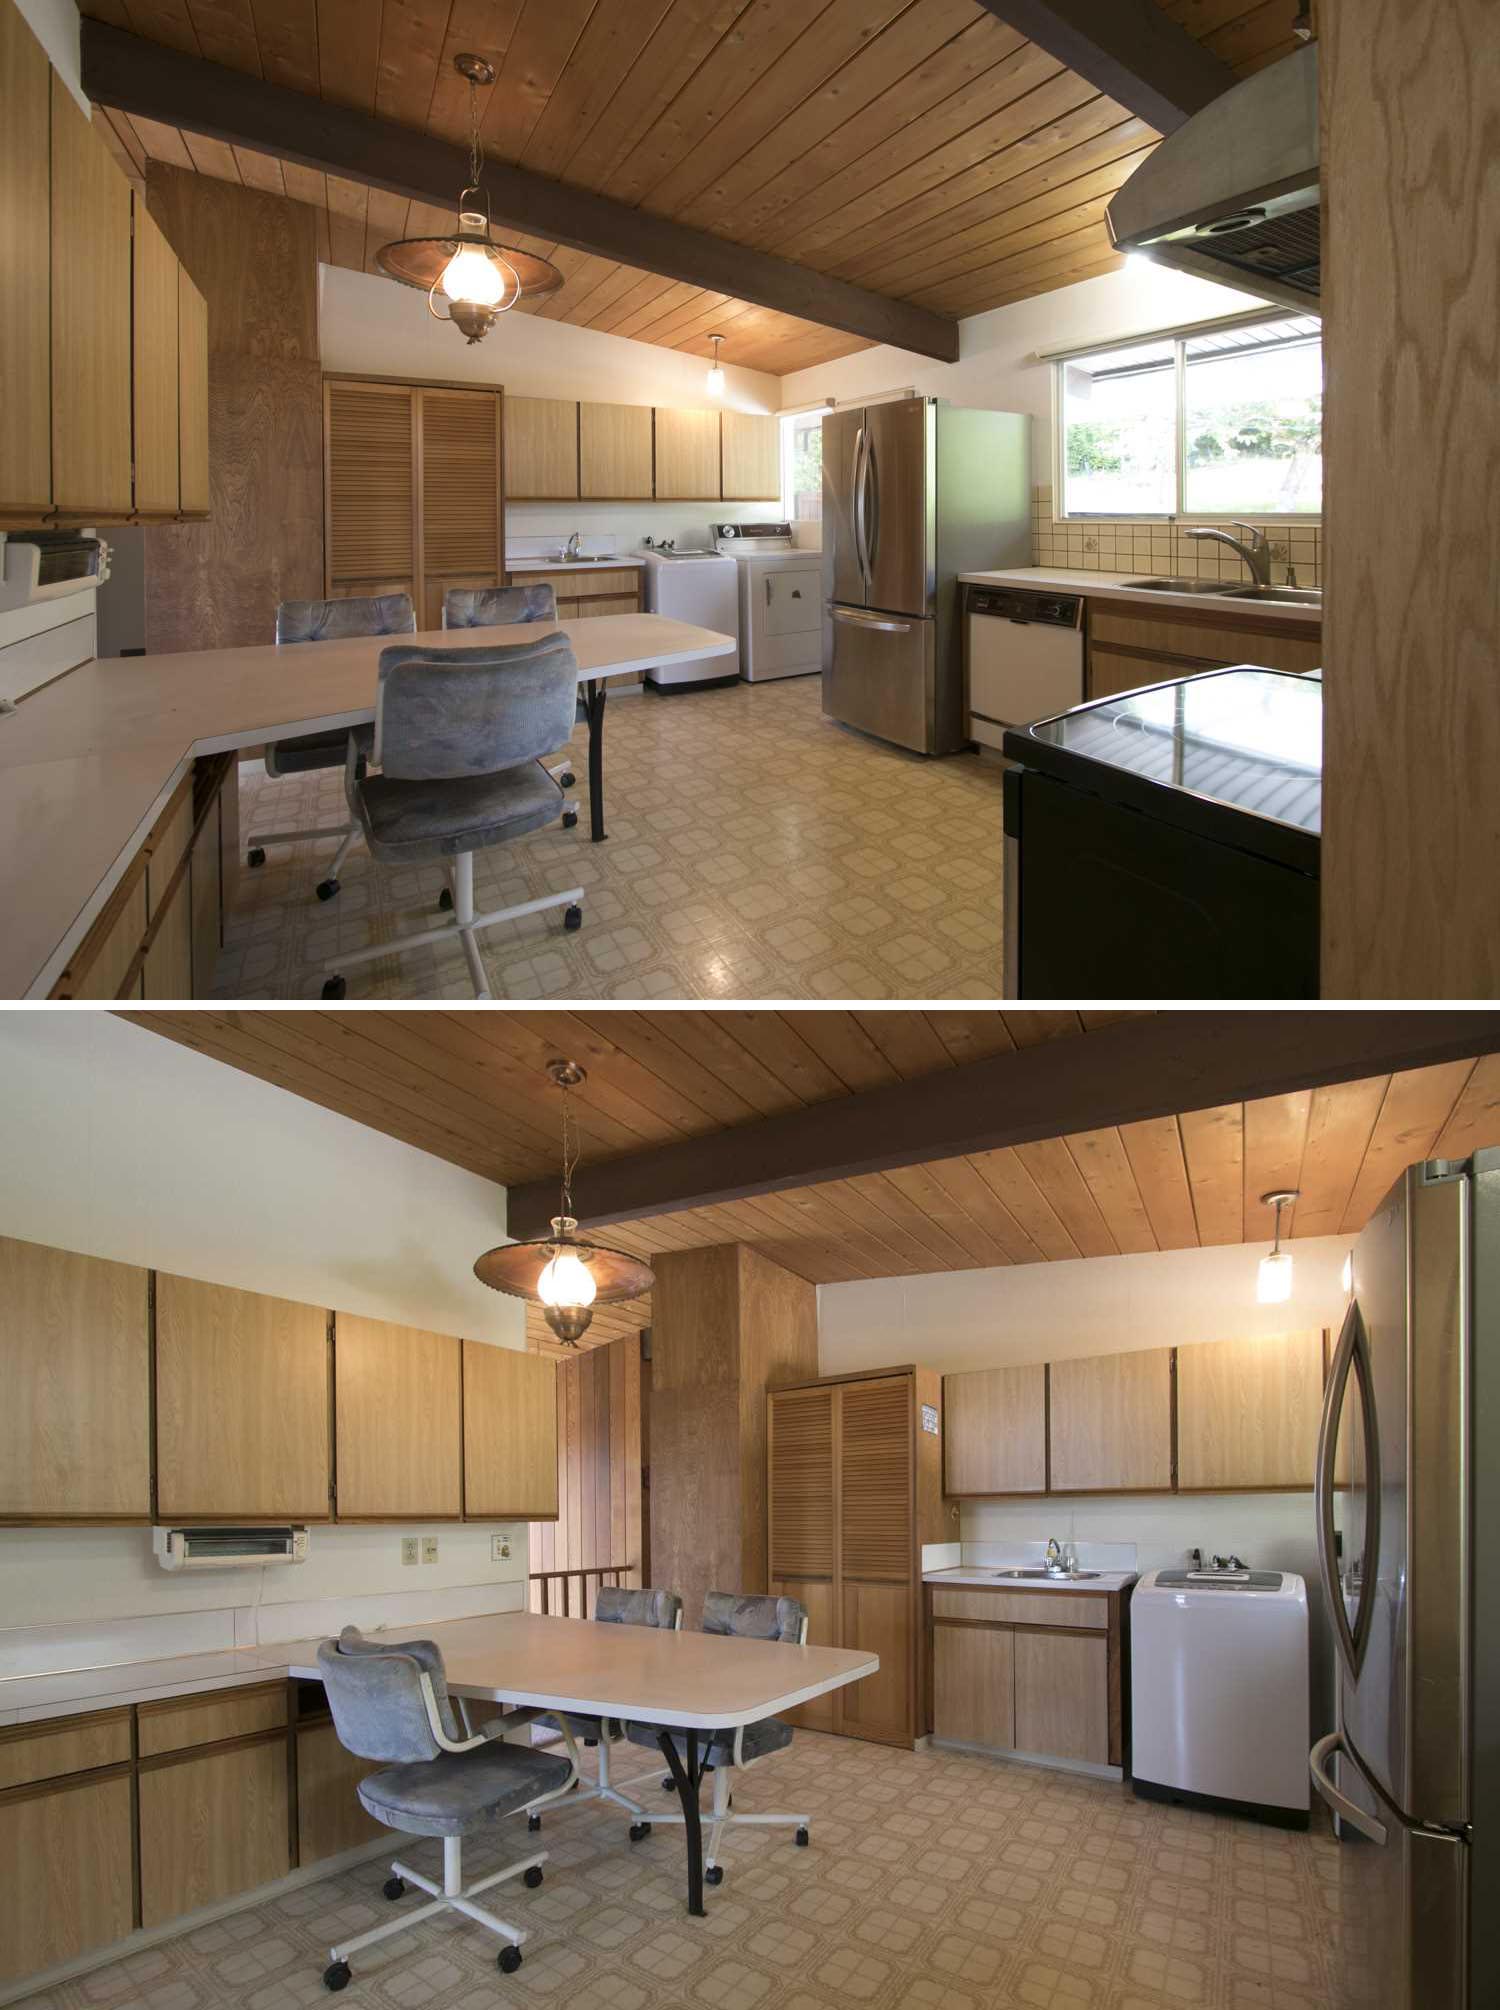 BEFORE - A dated '60s kitchen included wood front cabinets, patterned linoleum flooring, and a peninsula countertop that acted as a casual dining area. There's also mismatched appliances.